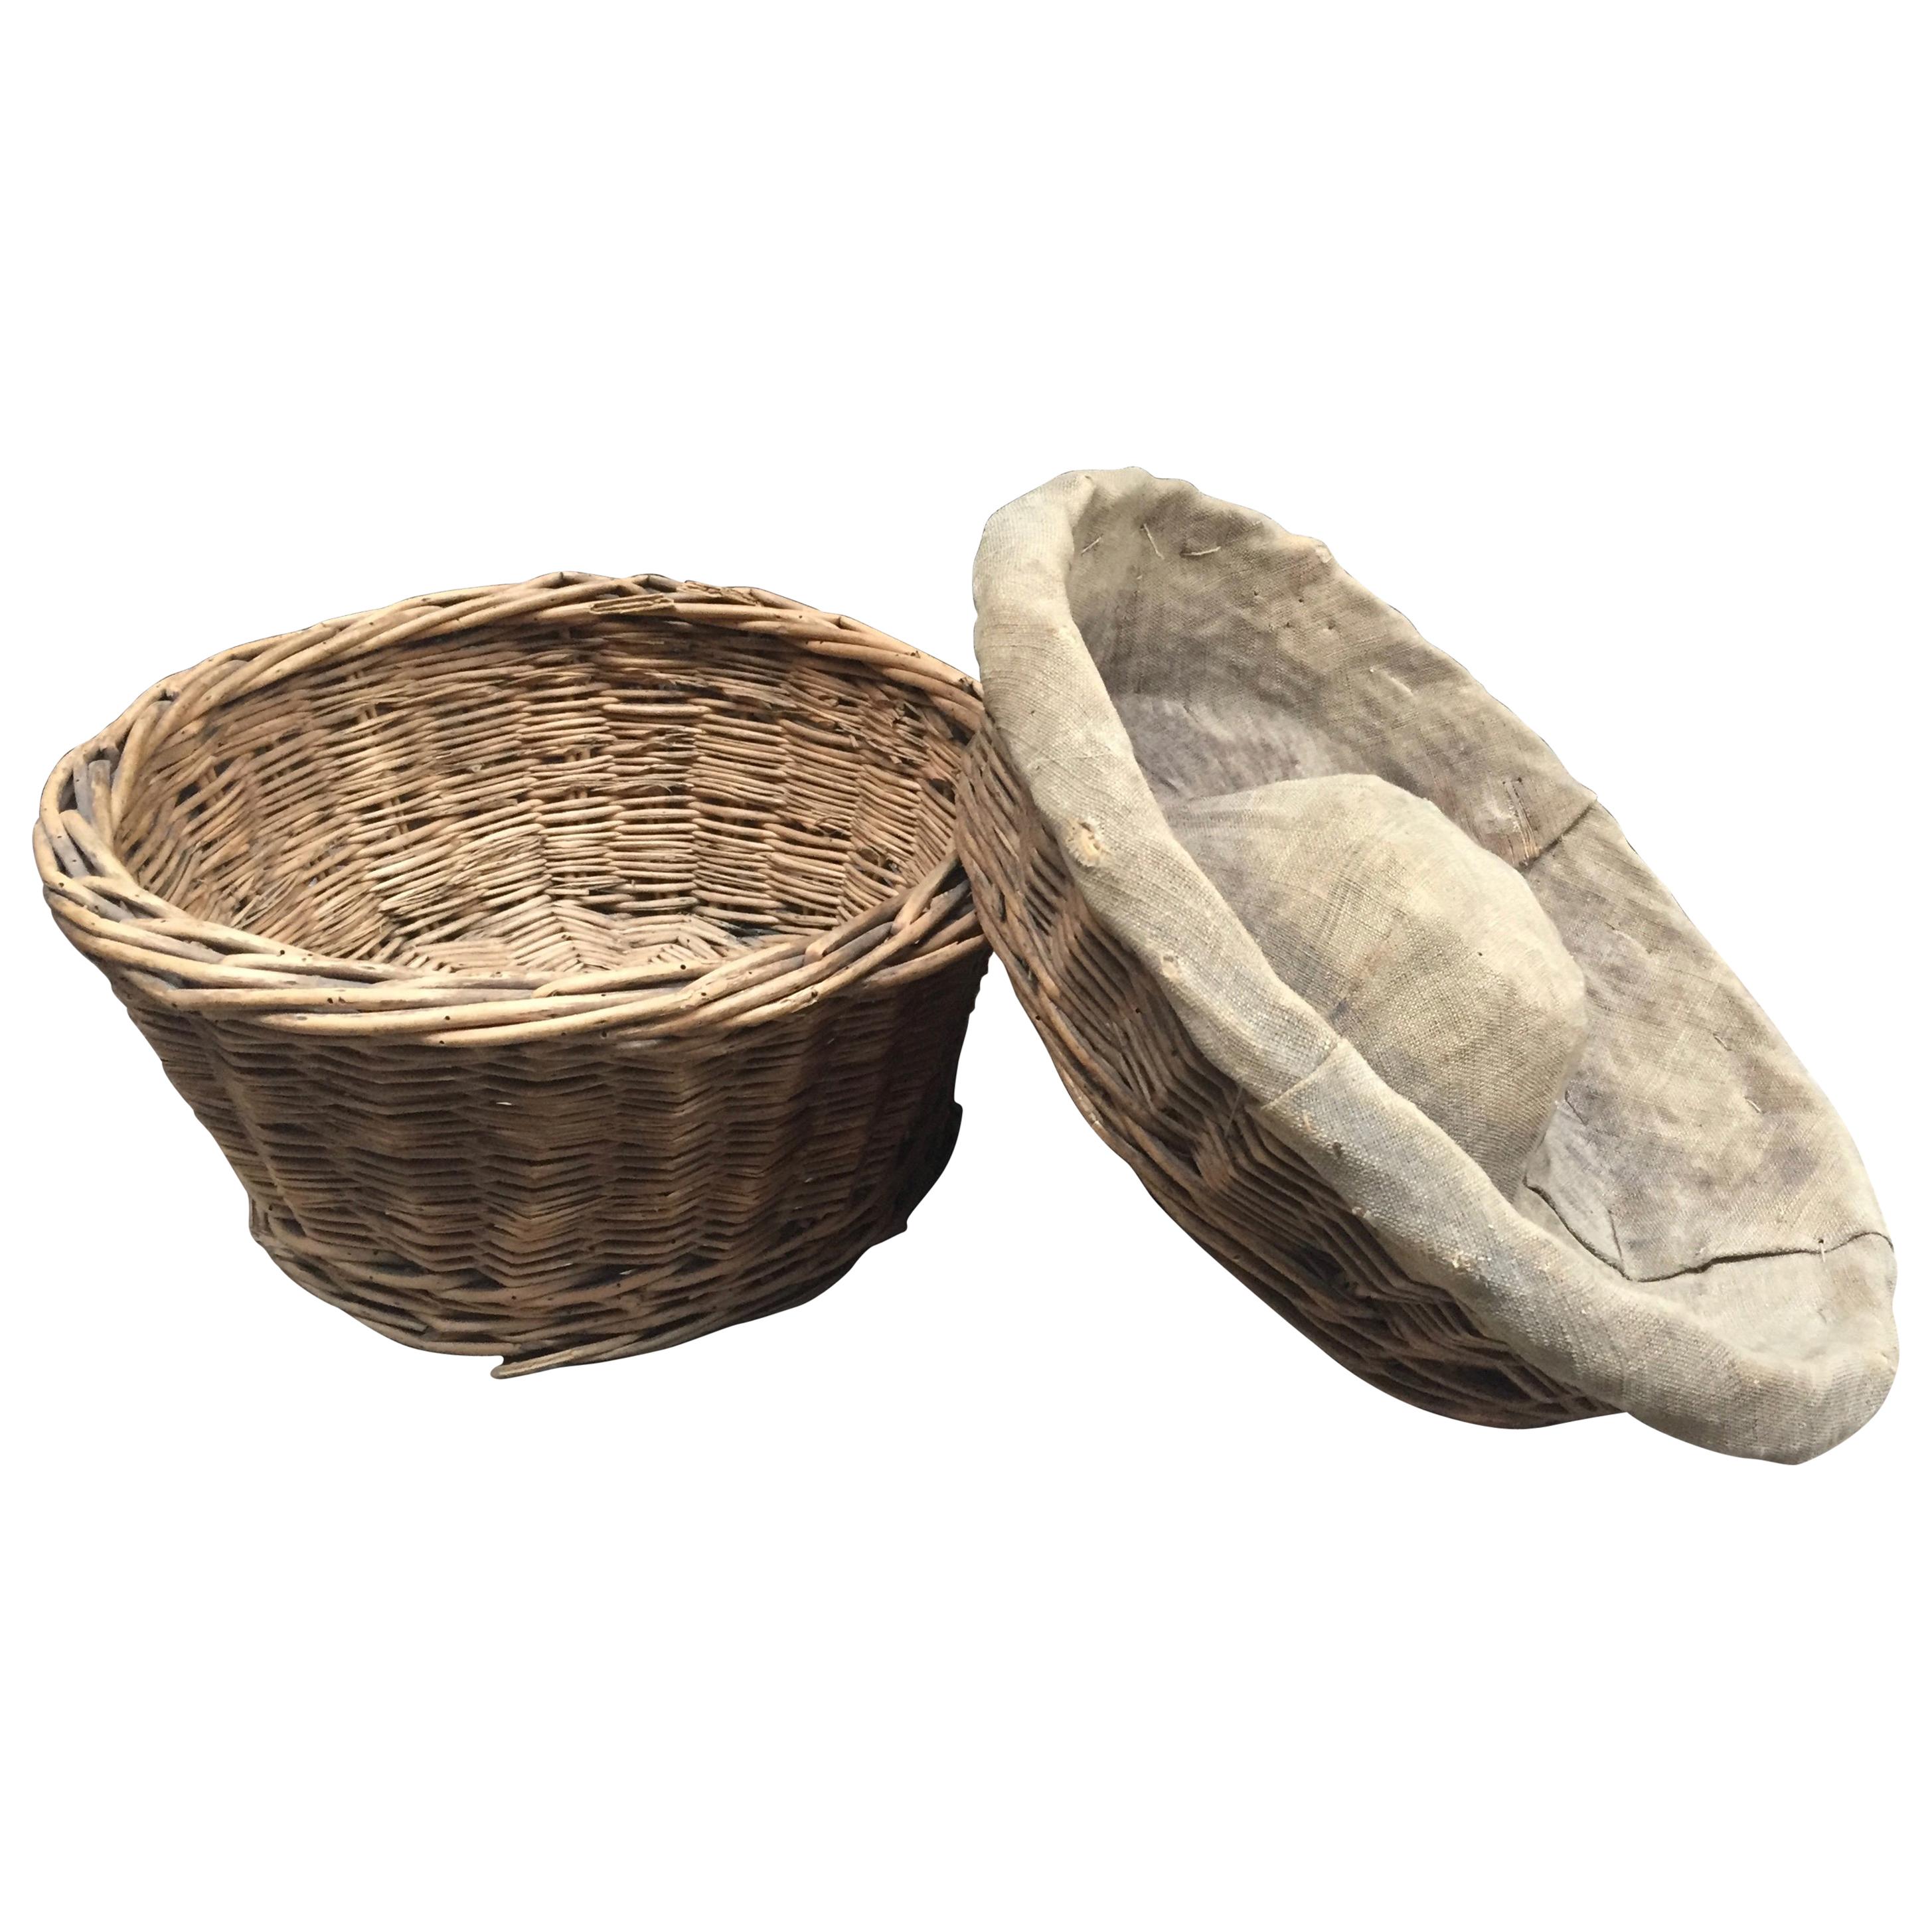 Two Vintage French Woven Wicker Bakers Baskets for Bread